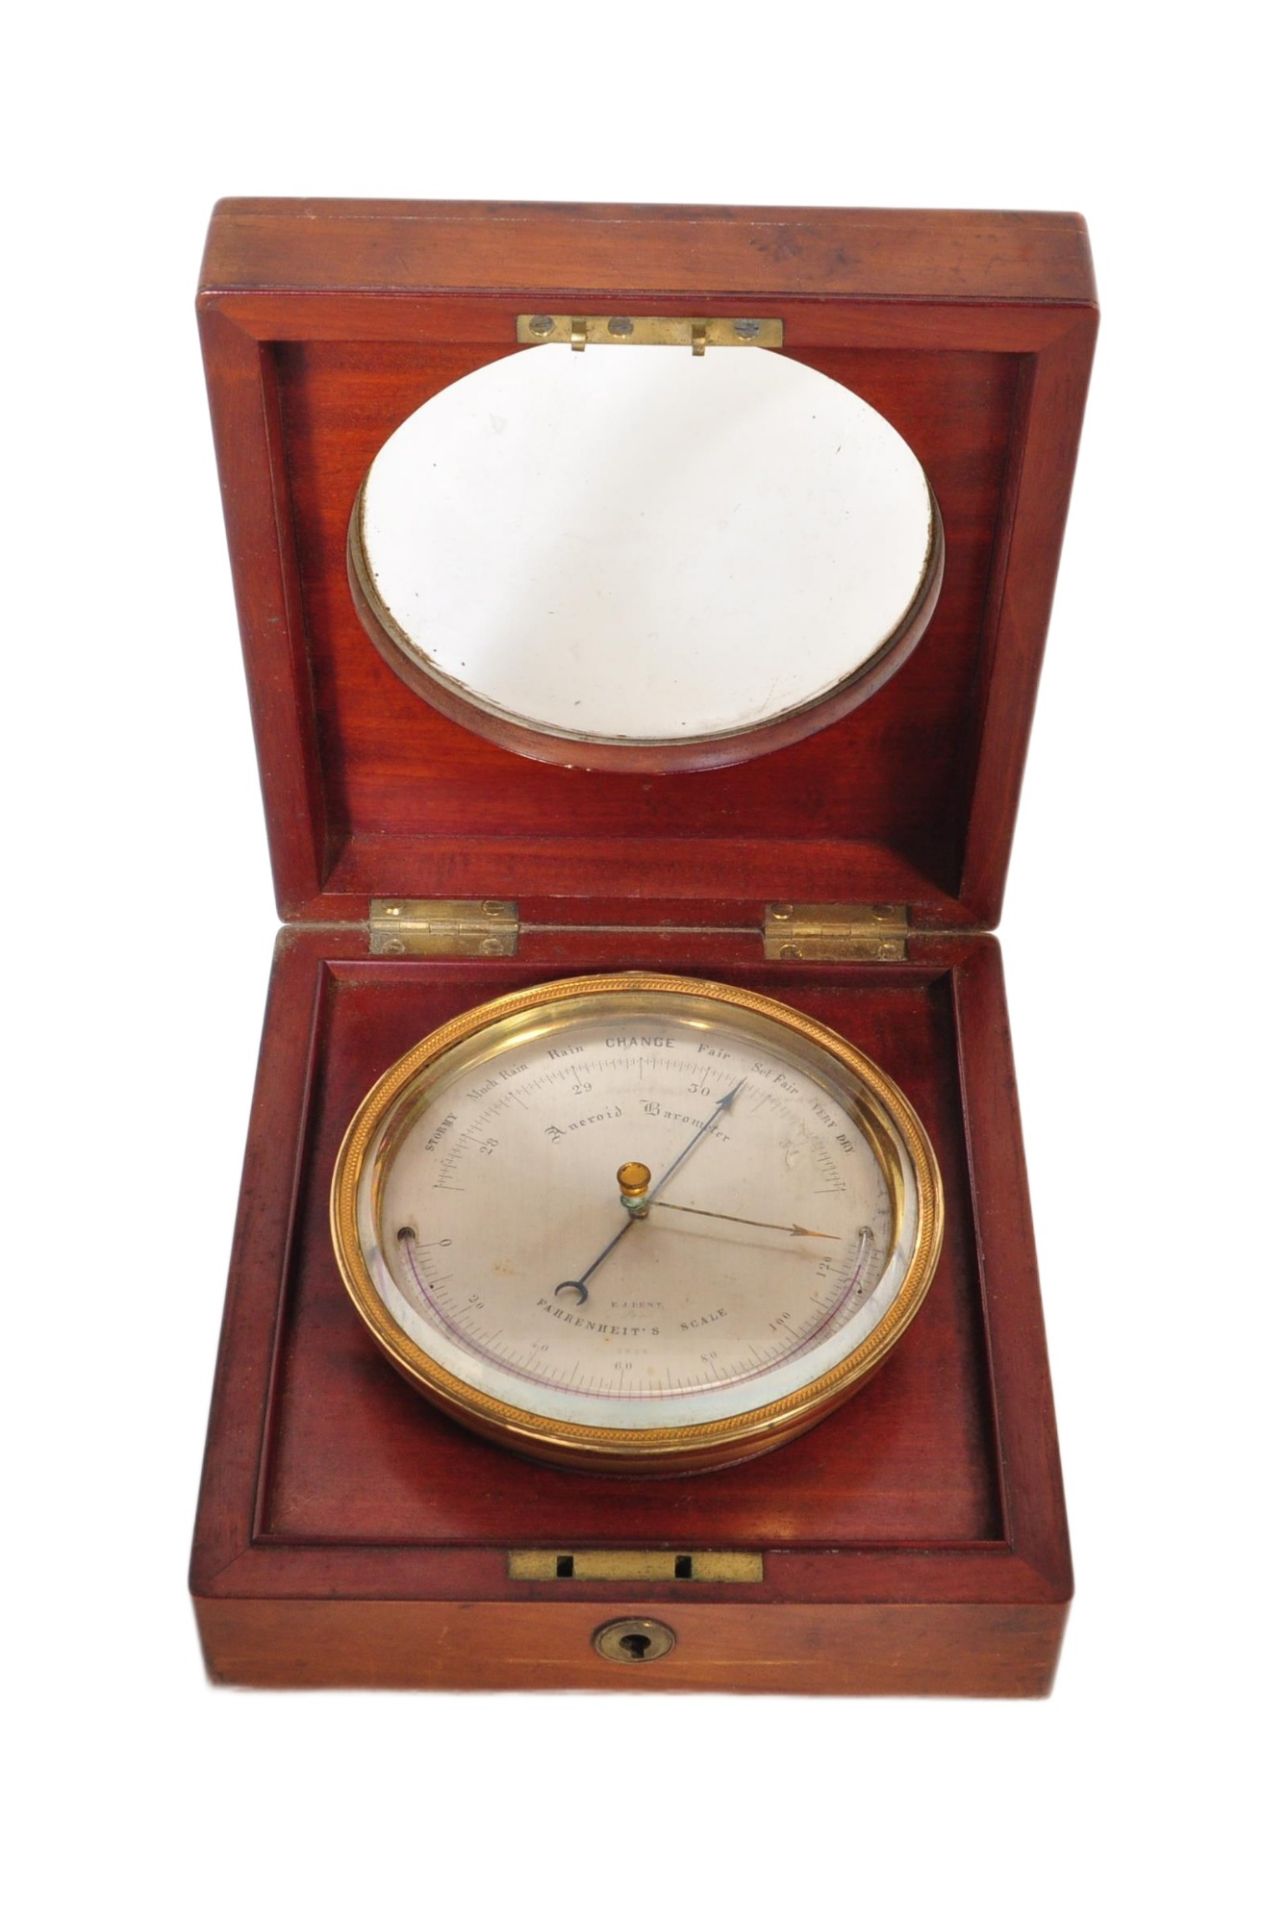 VICTORIAN 19TH CENTUTRY - DENT OF PARIS - MARITIME BAROMETER